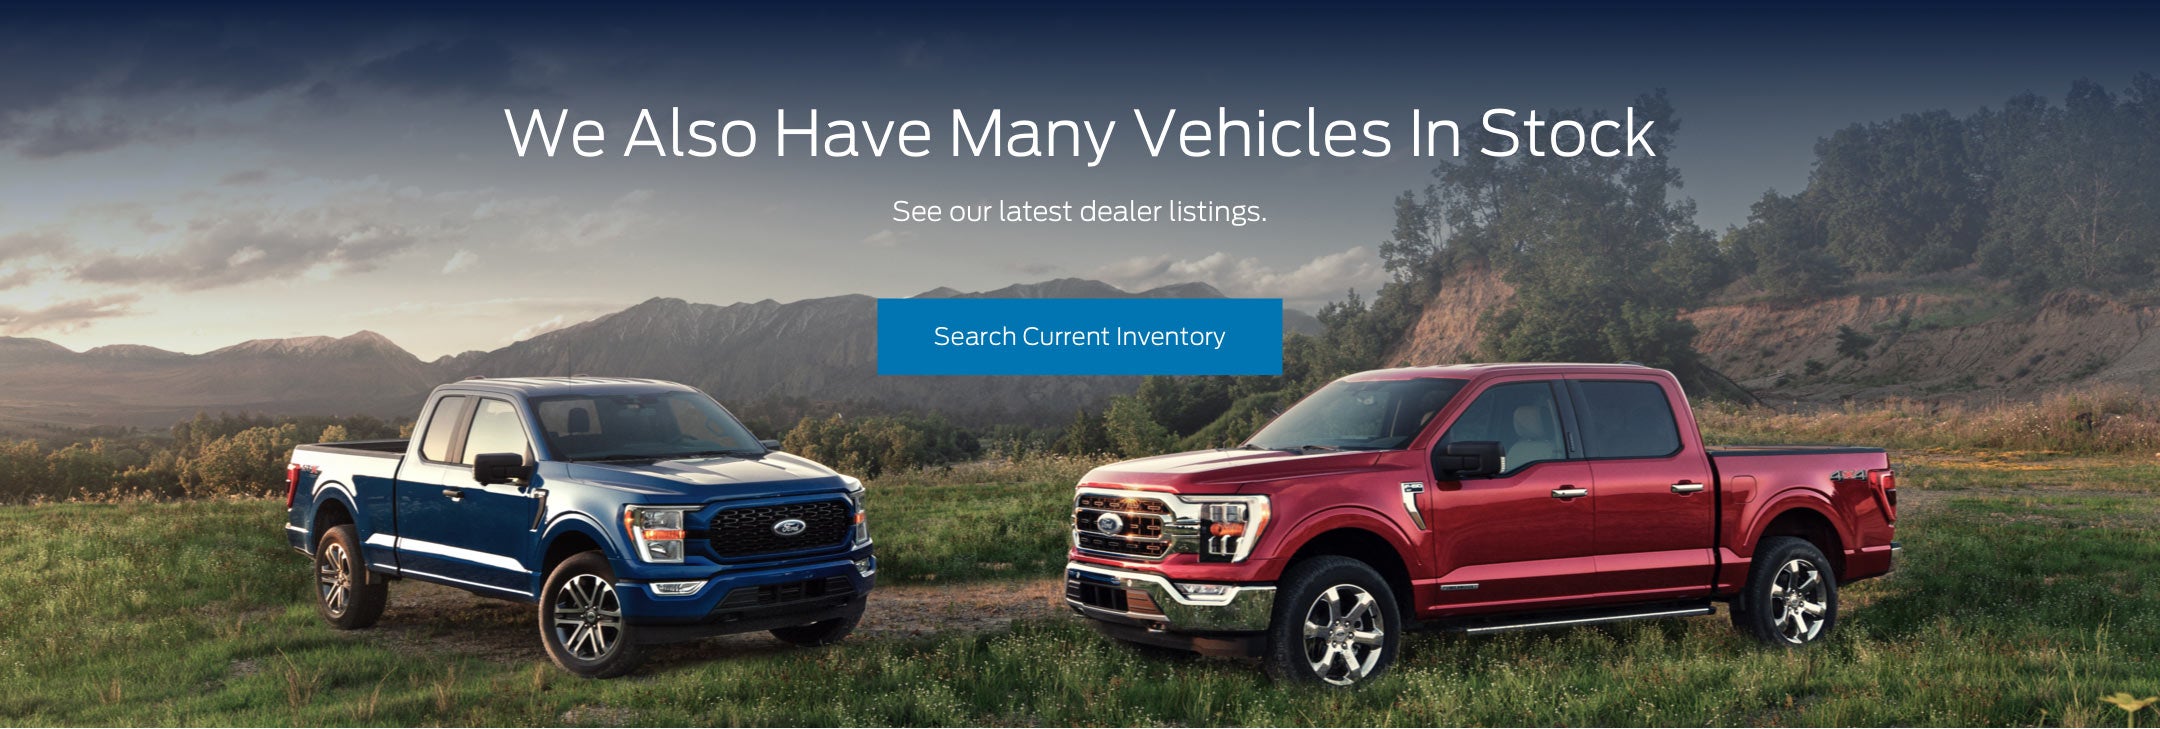 Ford vehicles in stock | Vaughn Ford Lincoln in Oakdale LA